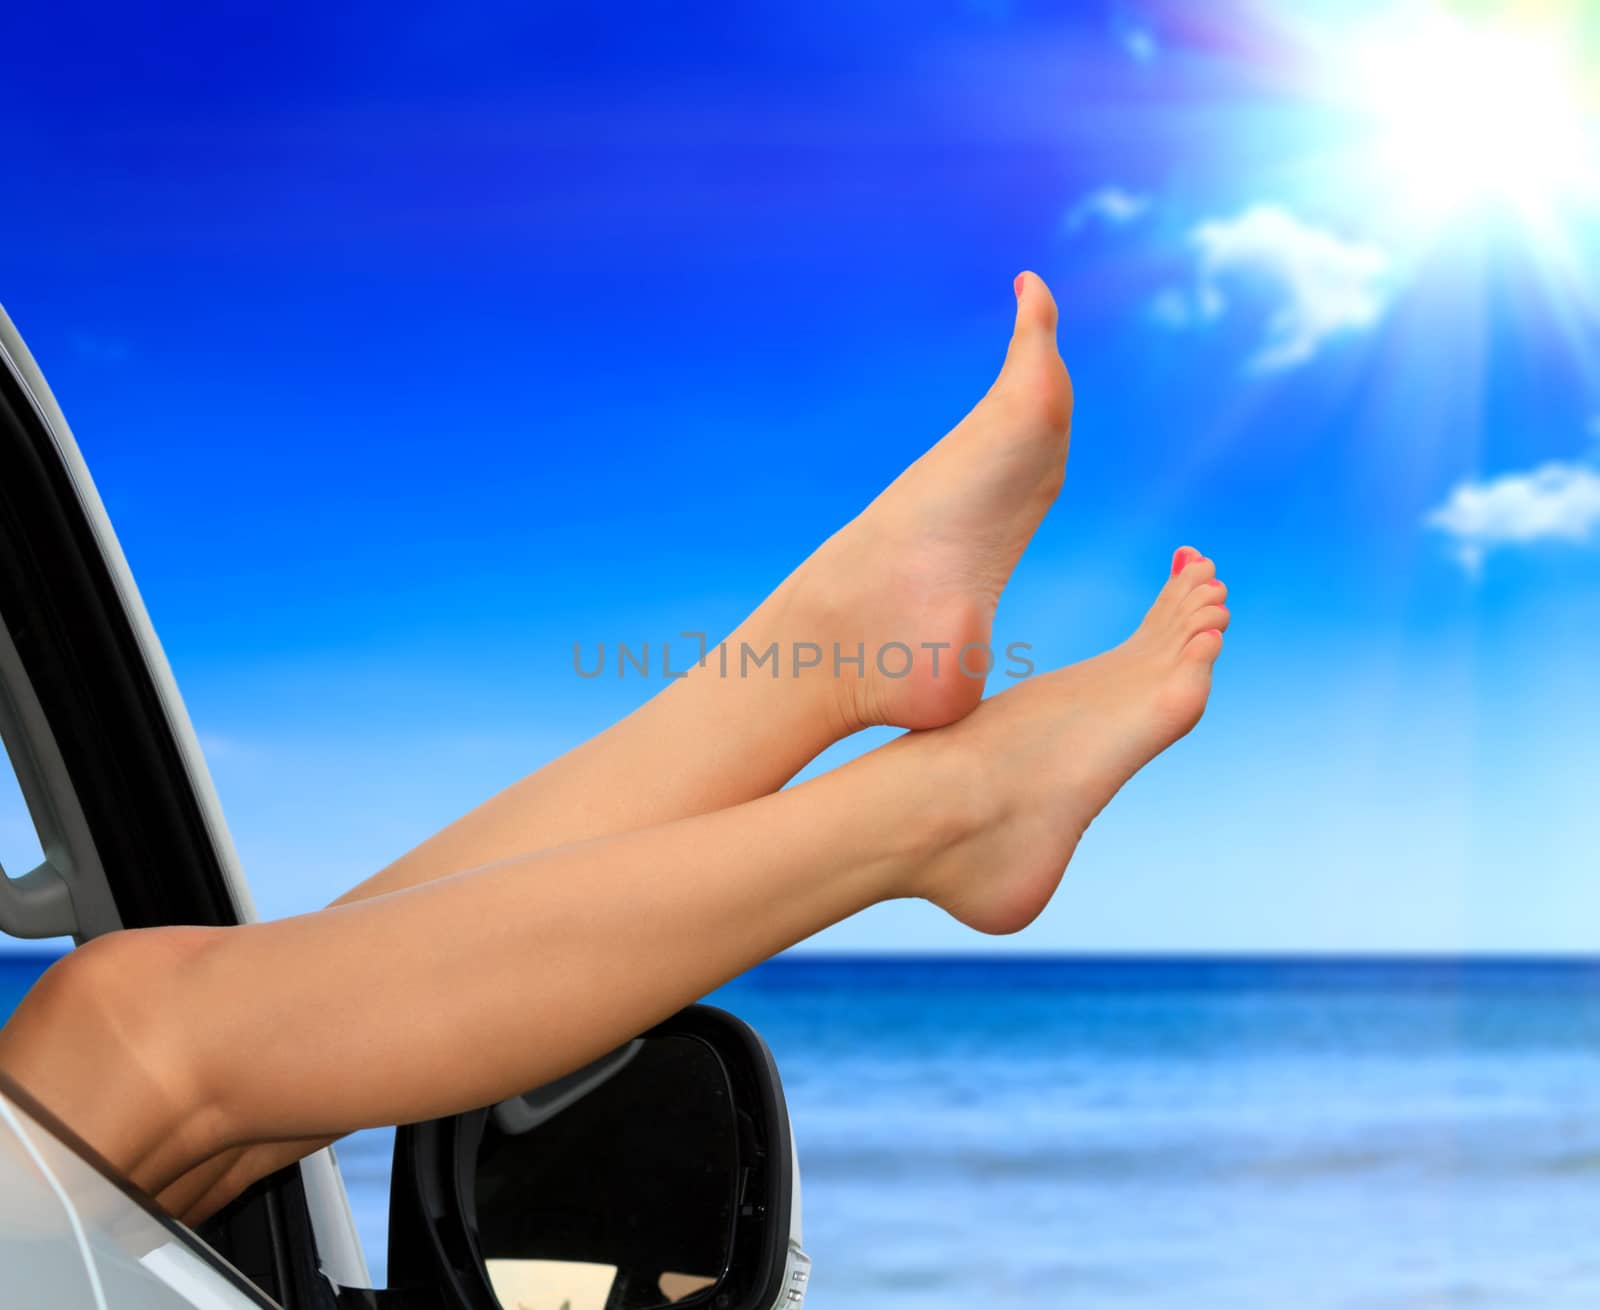 Beaitiful female legs against the sea and summer blue sky. Vacation, travel summer holidays concept. Woman shows her slim legs from the car window